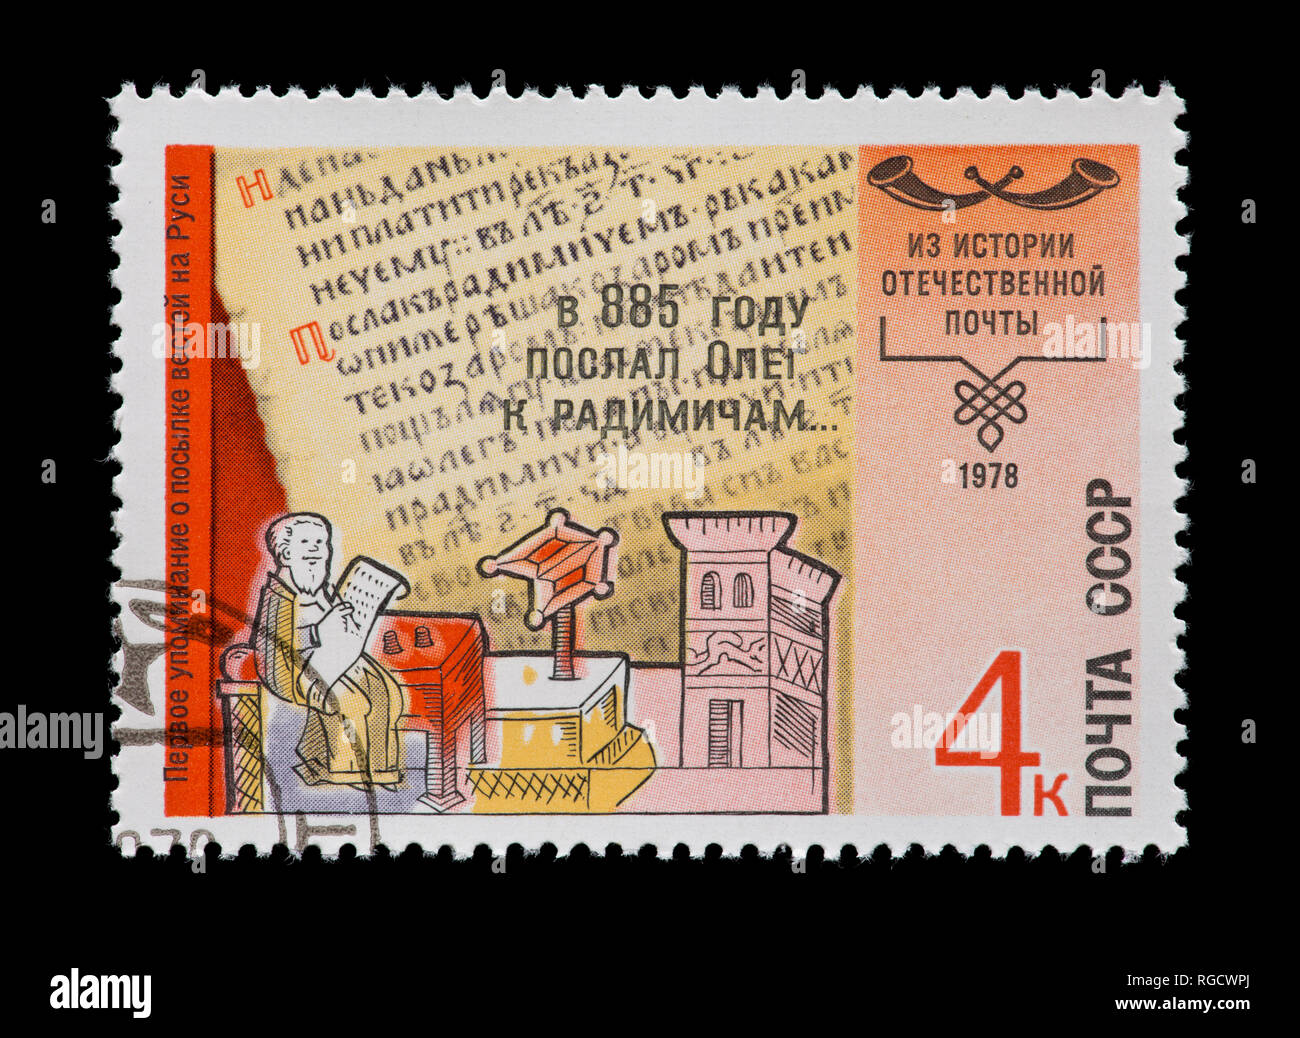 Postage stamp from the Soviet Union depicting Nestor Pechersky, chronicler from around 885, history of the Postal system Stock Photo